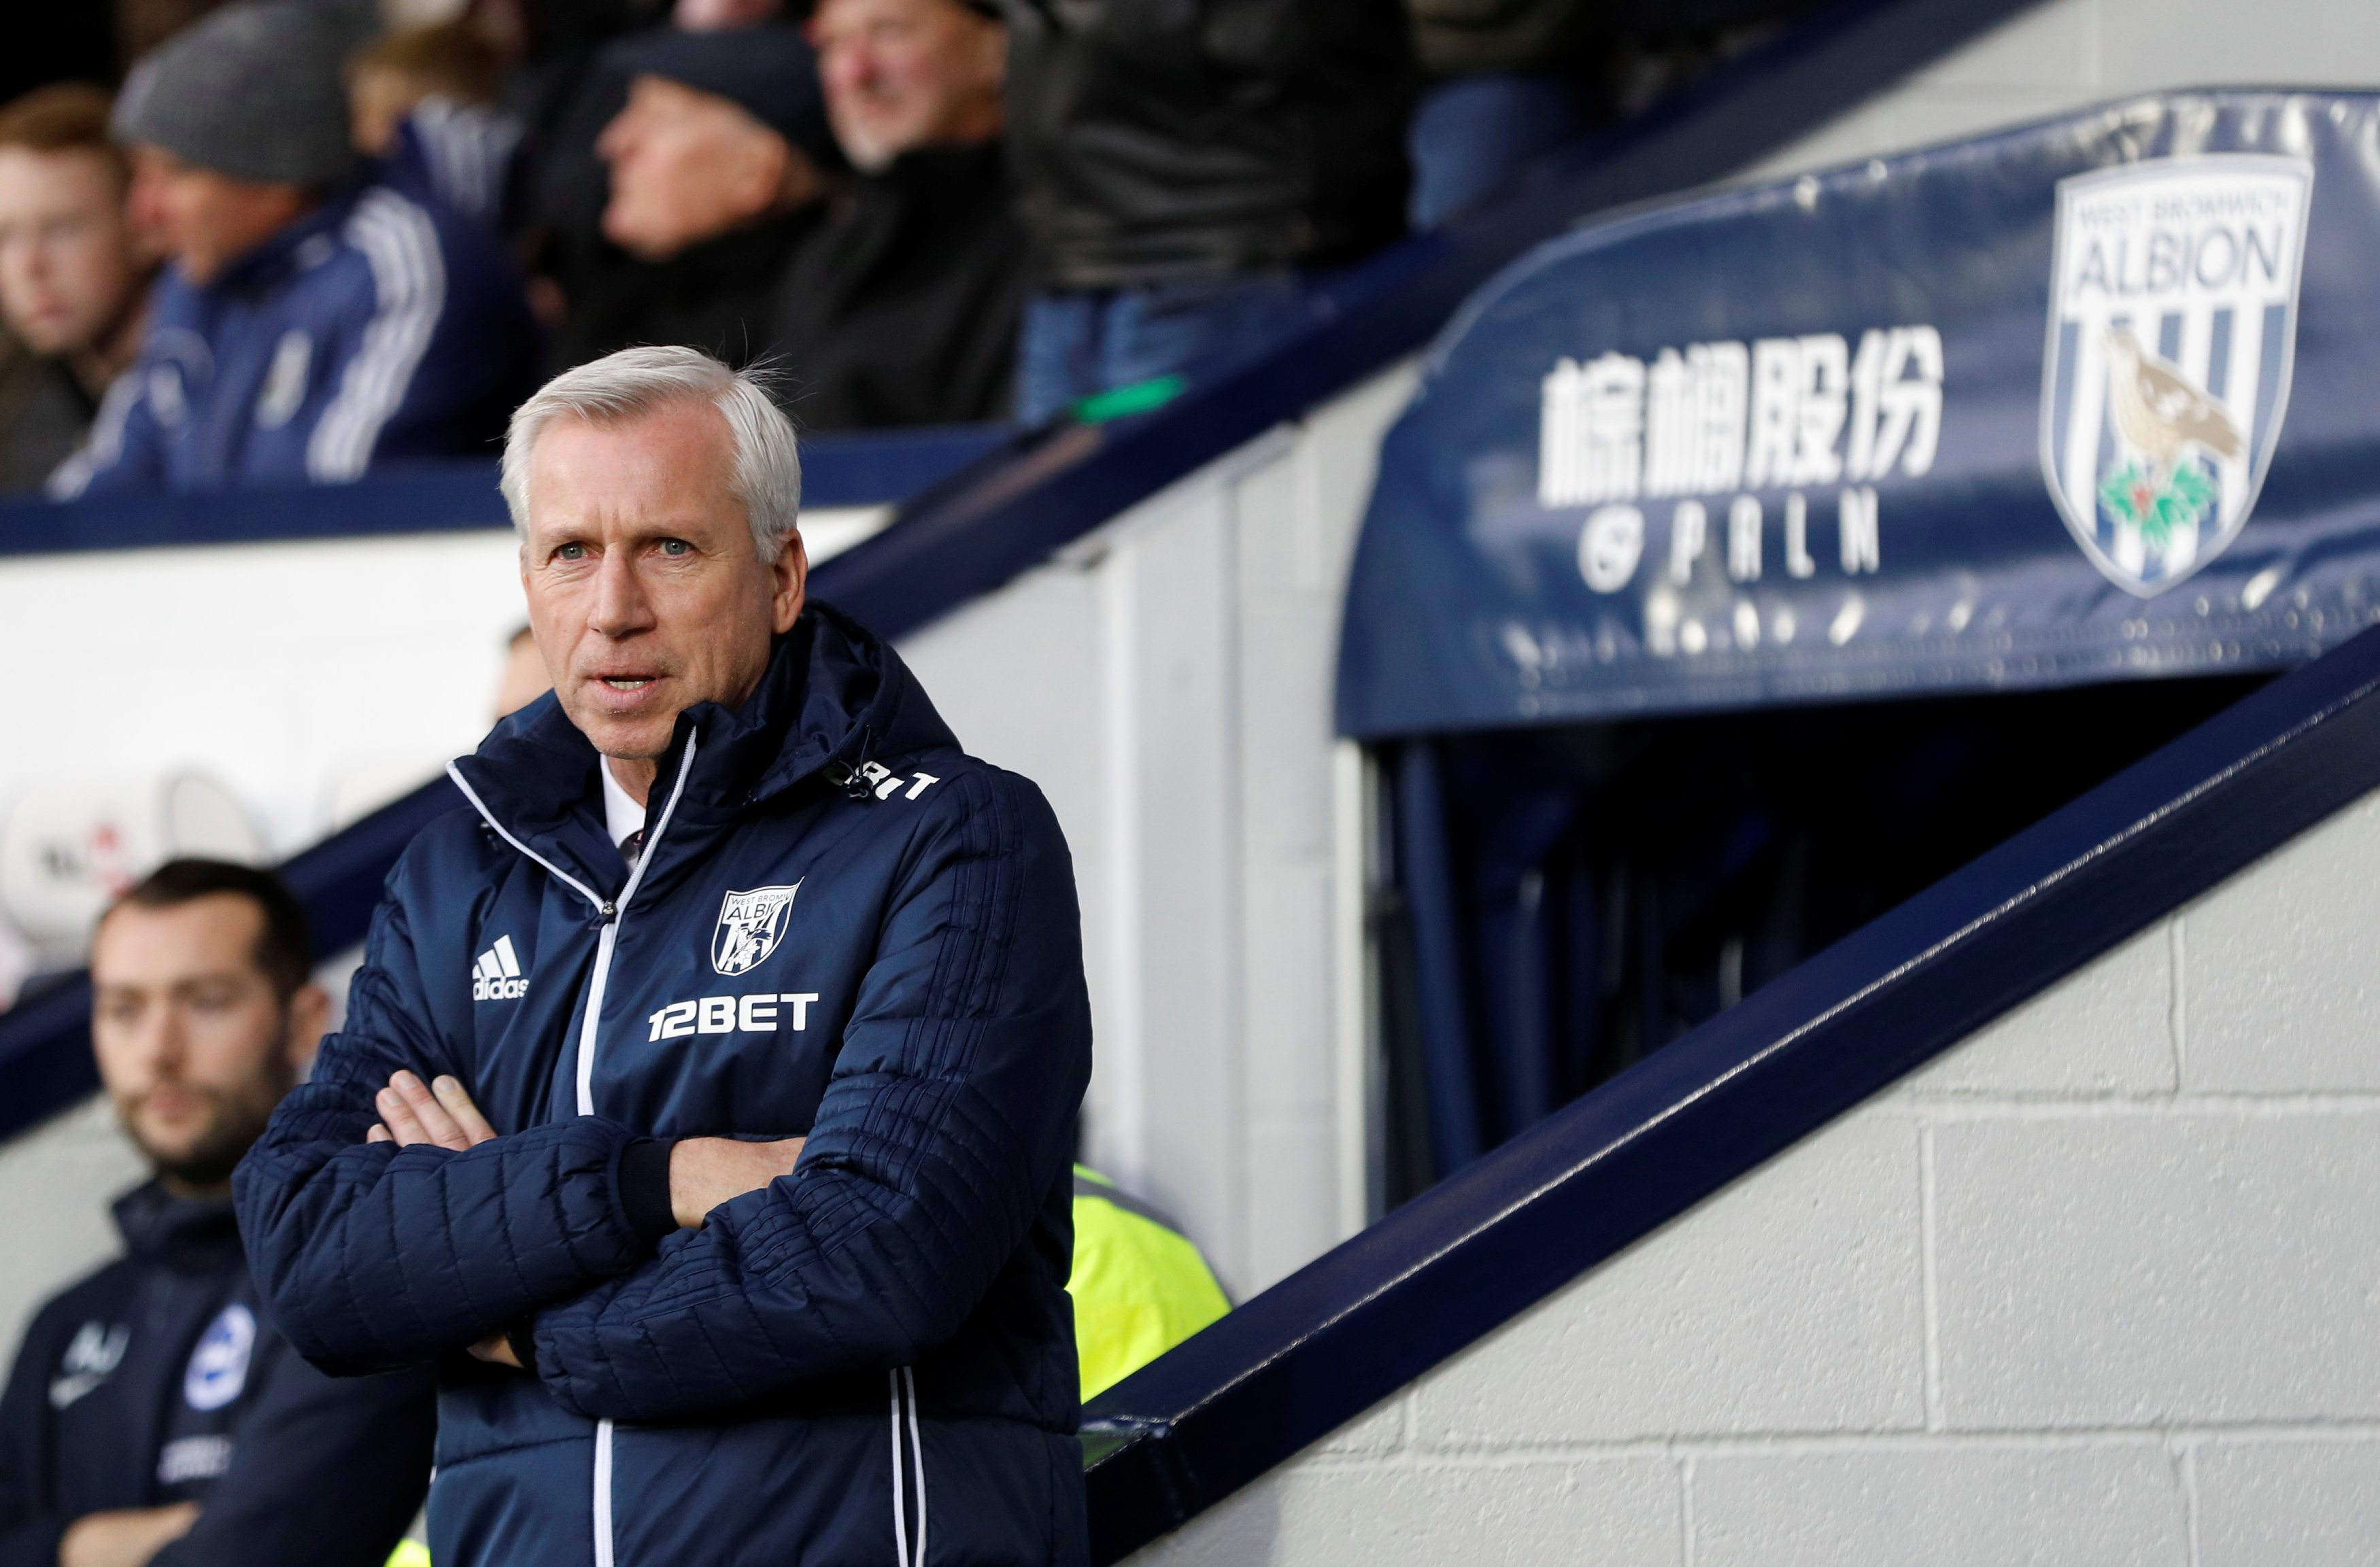 Football: Pardew bags first league win as Albion manager